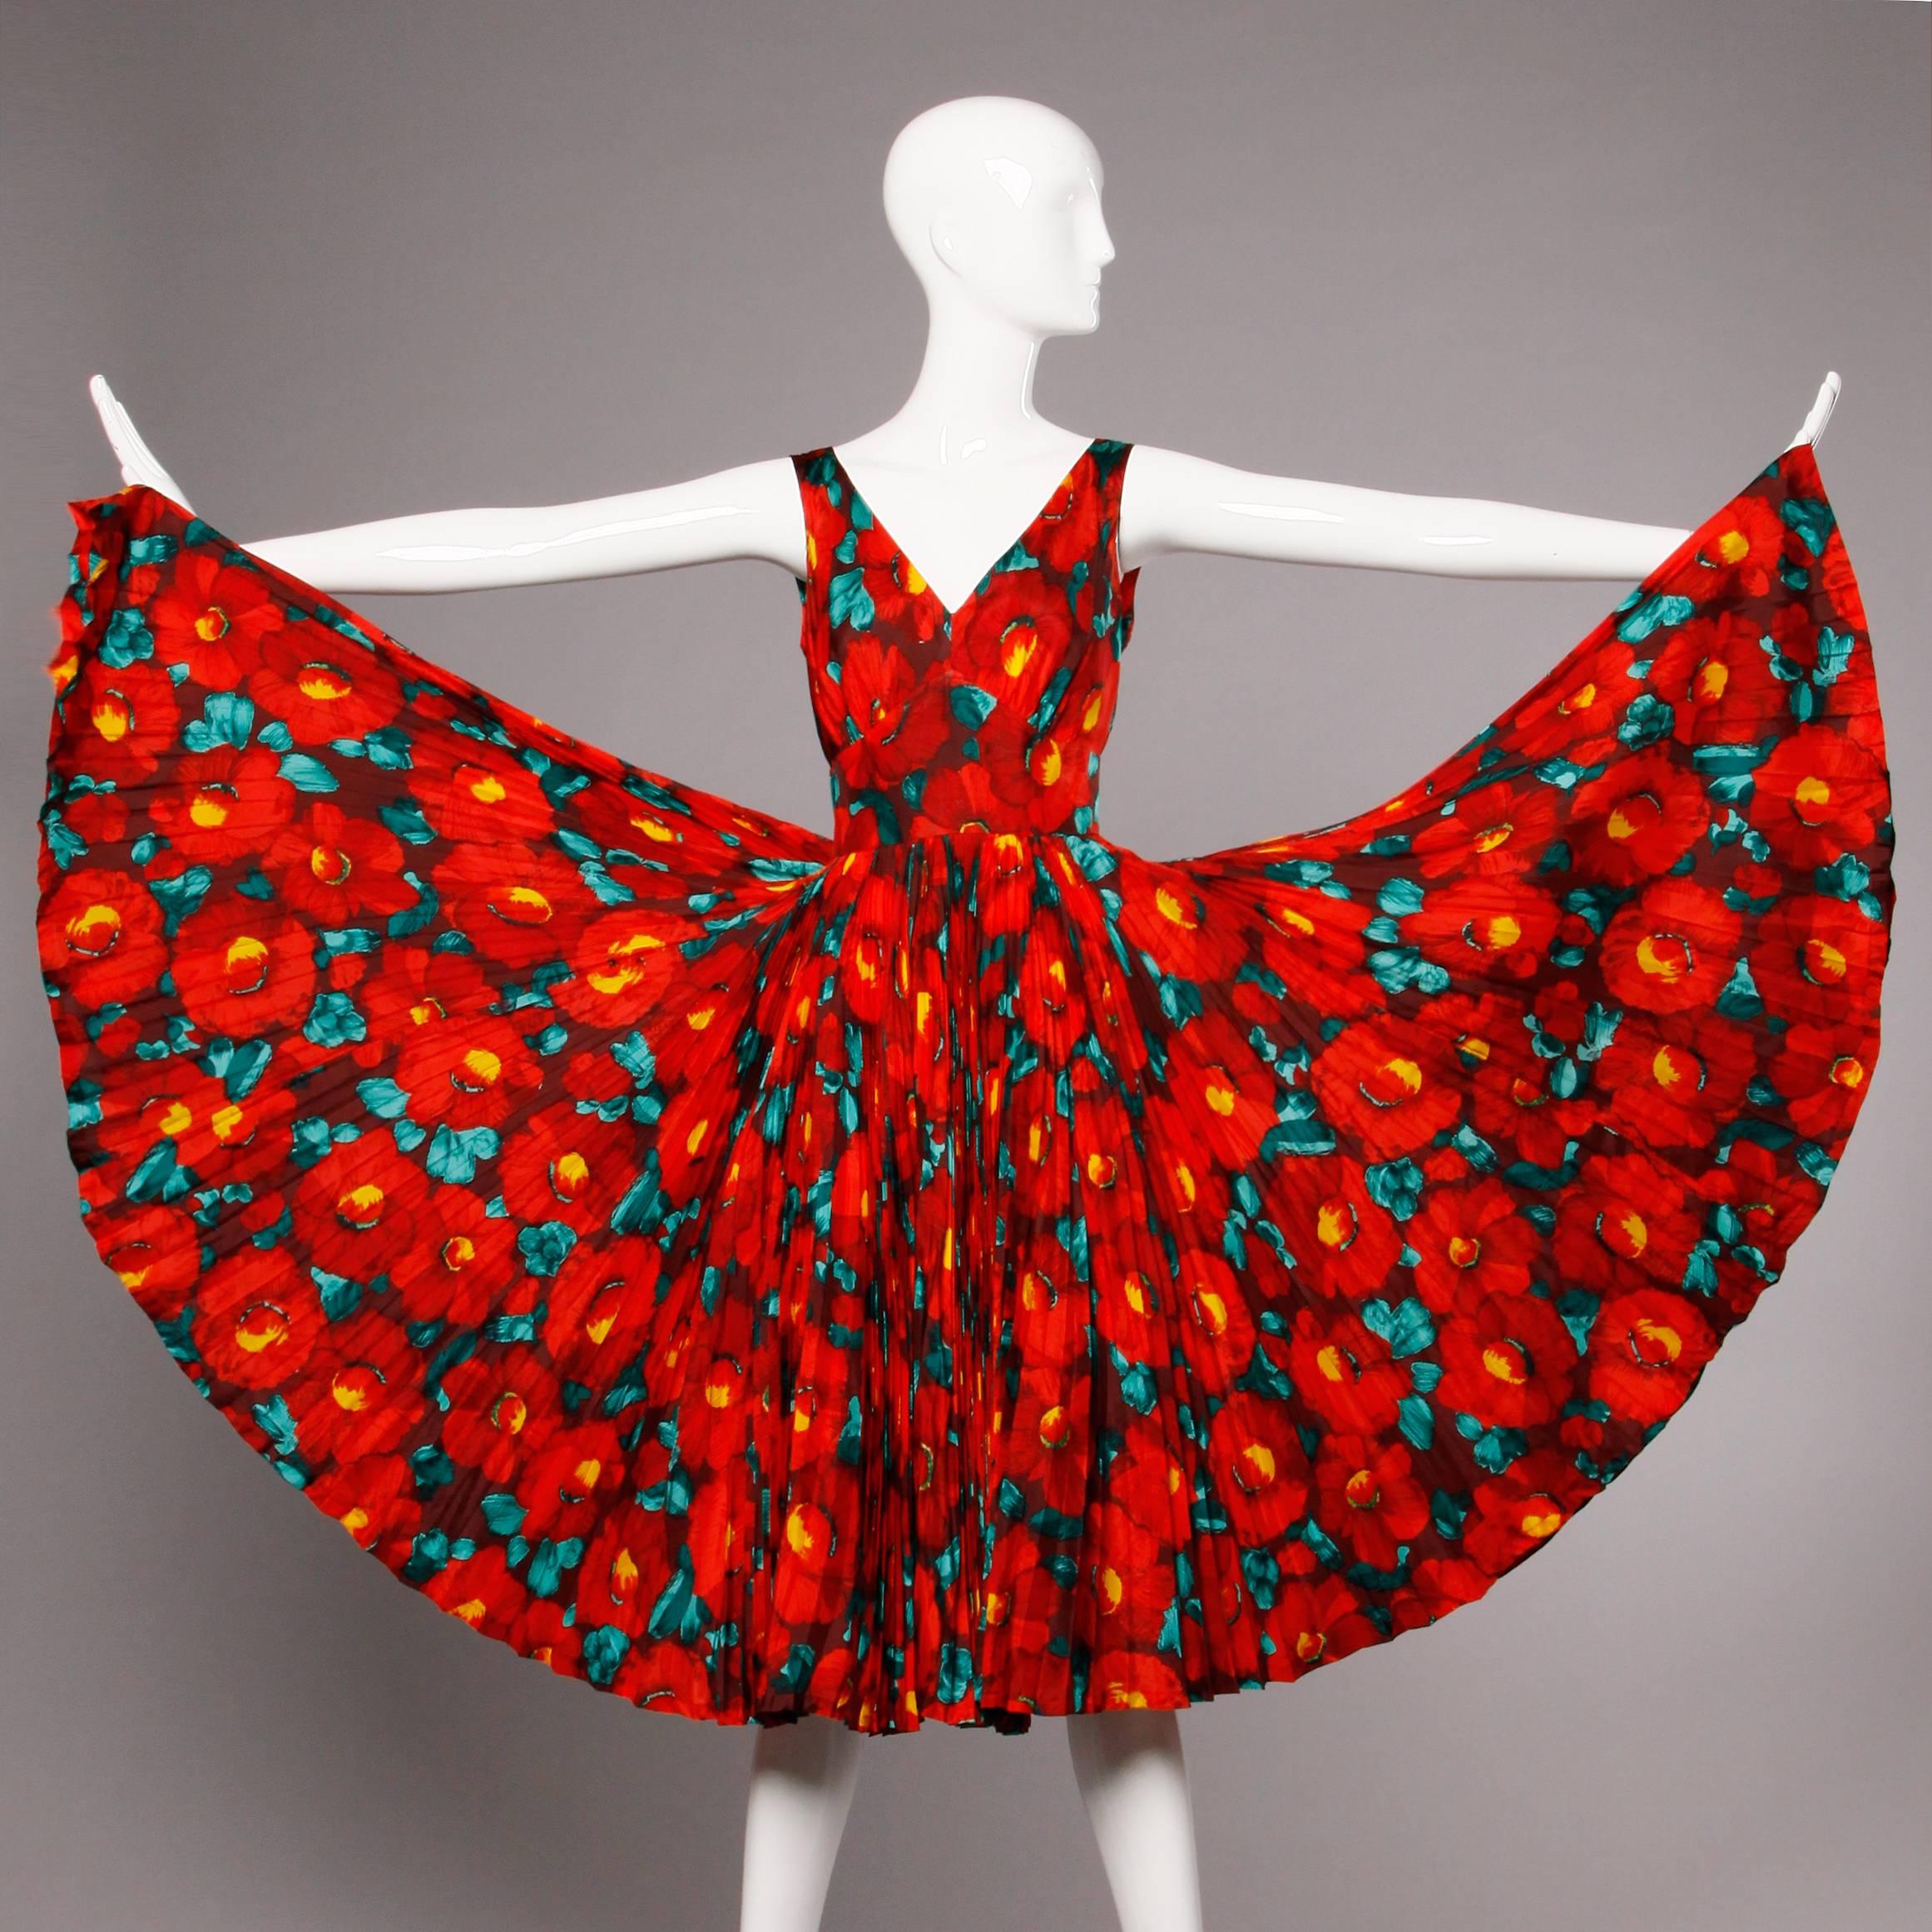 This dress is incredible! The silk fabric is gorgeous with a vibrant red floral print. The skirt is full and features a lot of pleated fabric and a 360 degree sweep. Fully lined. Fabric content is not marked but it feels like 100% silk. Rear metal